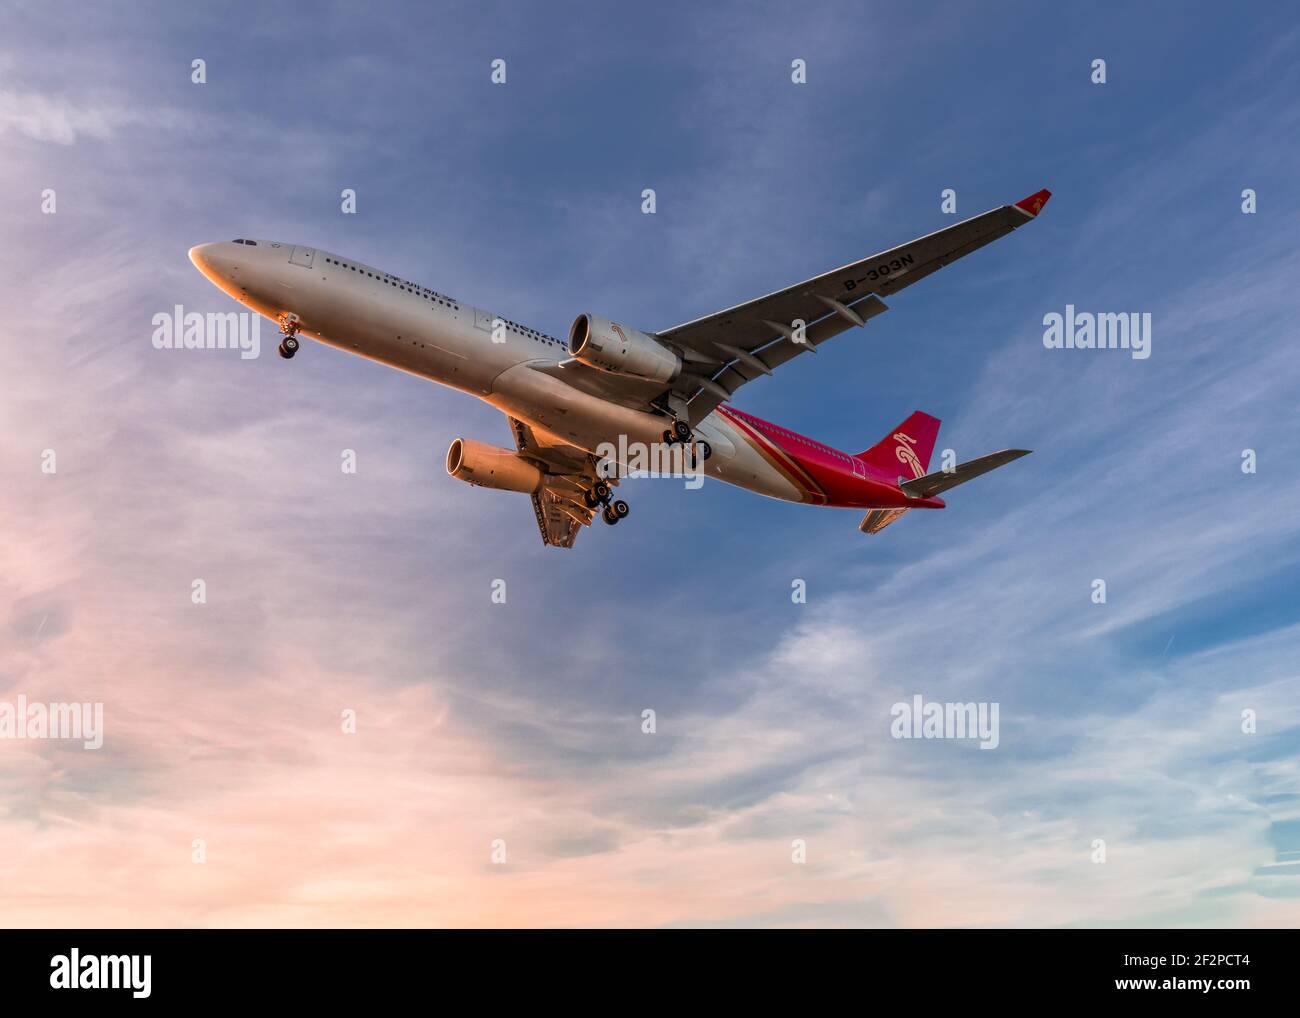 London, Heathrow Airport - May 2019, Chinese Airline, Shenzhen Airlines Airbus A330 Aircraft, flying low overhead as it comes in to land at sunset. im Stock Photo